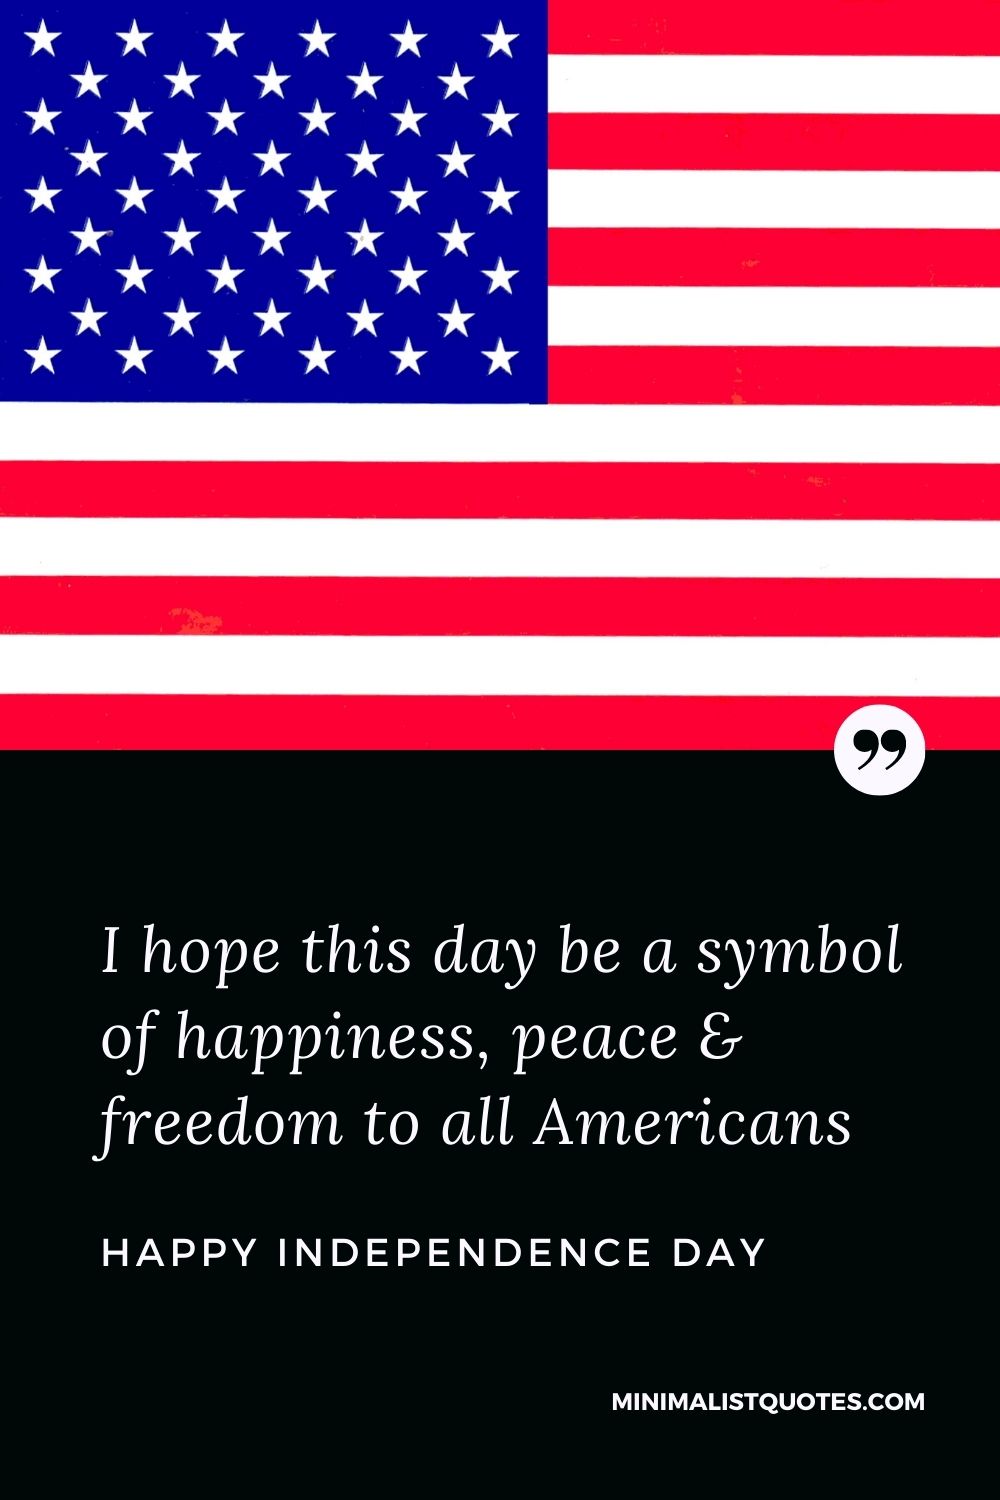 Independence Day wishes quotes with images: I hope this day be a symbol of happiness, peace & freedom to all Americans. Happy Independence Day!